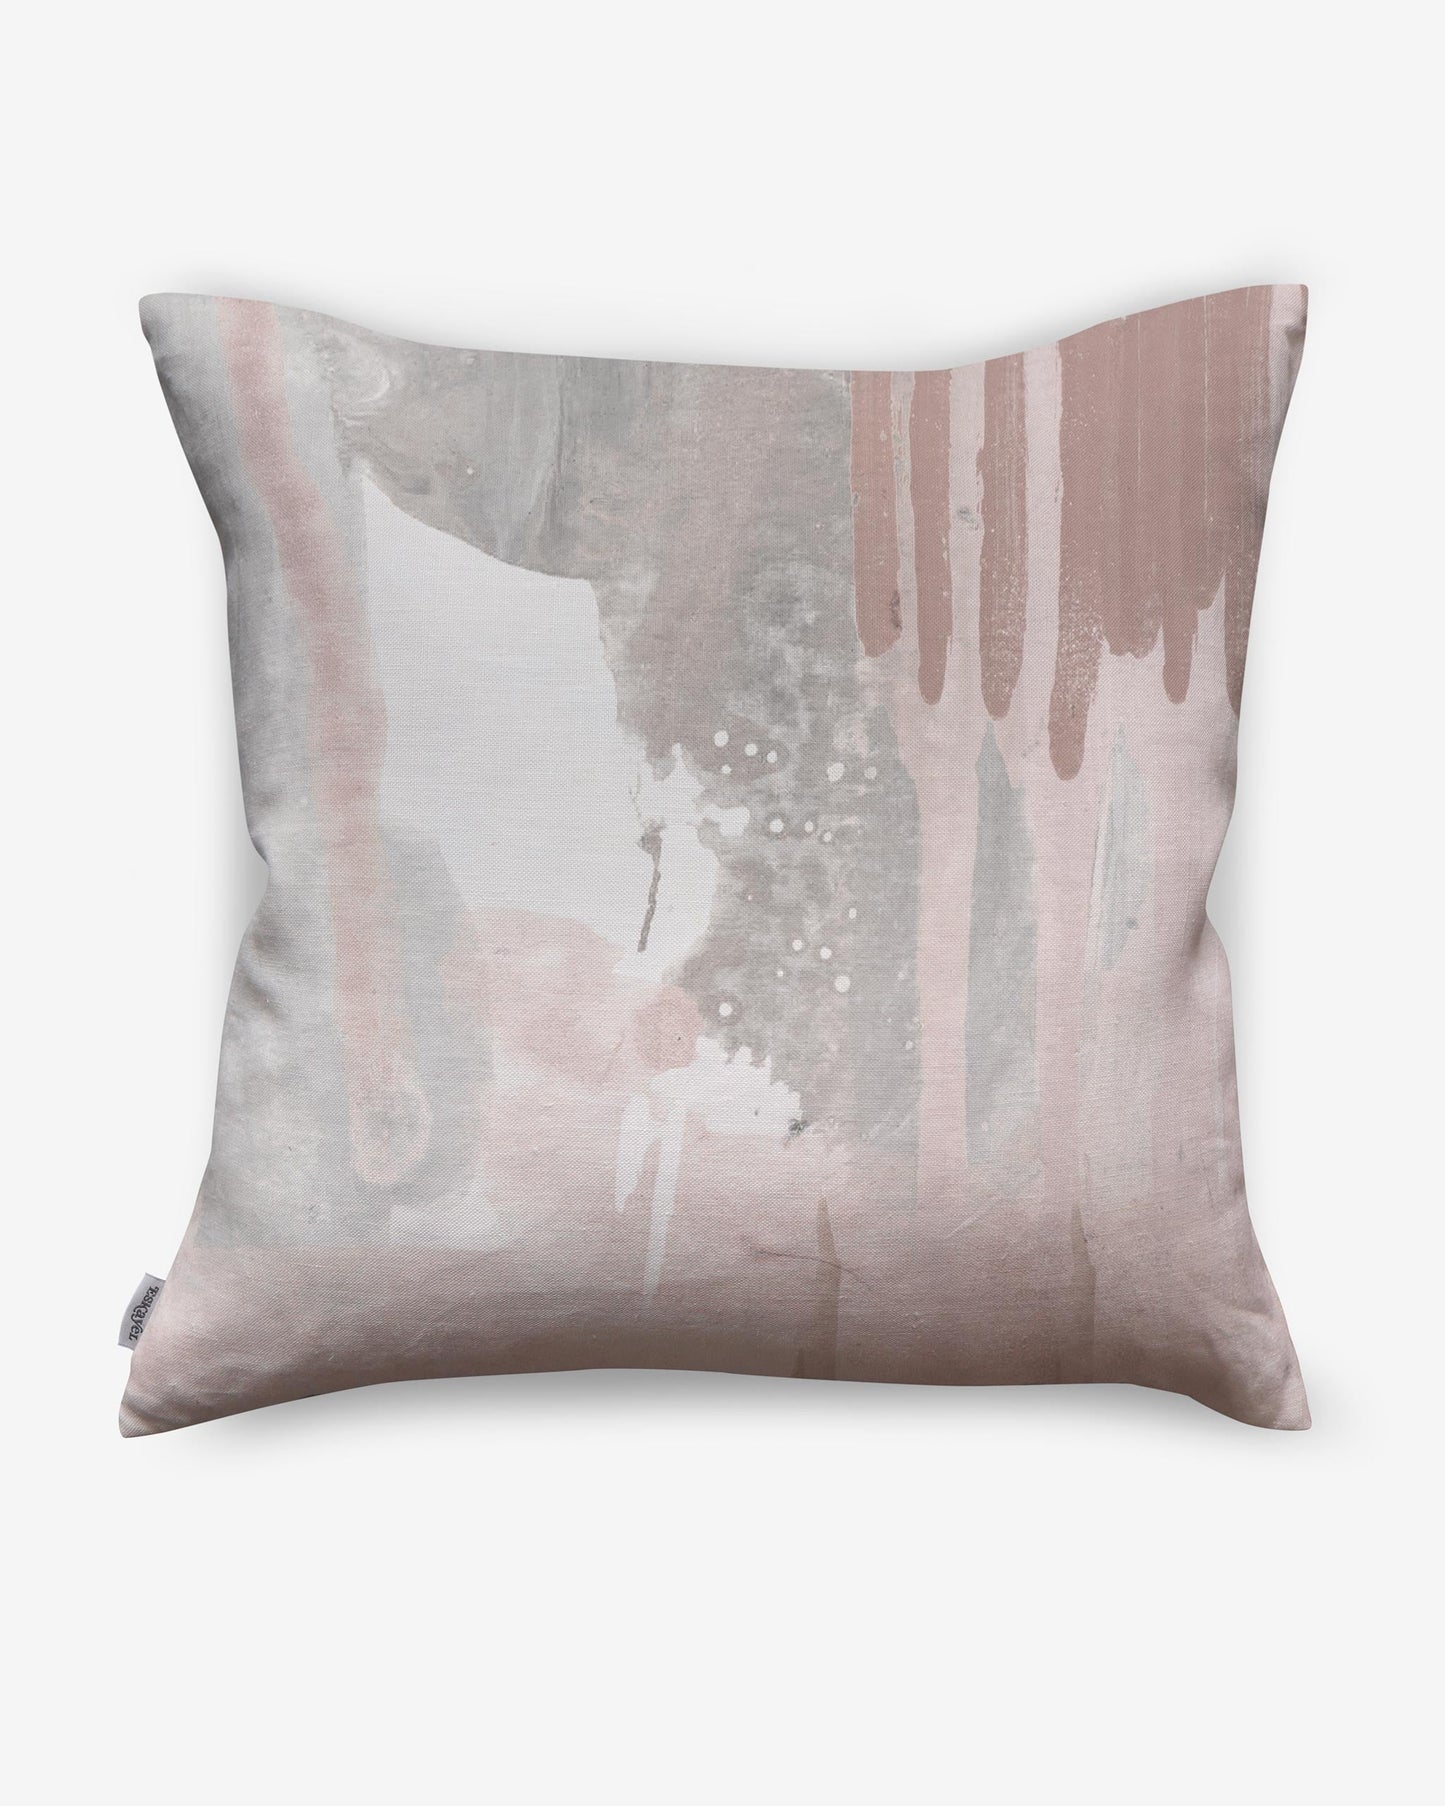 A Majorelle Pillow Lumier, a luxurious cushion with a pink and grey abstract painting on it, inspired by Majorelle gardens in Morocco